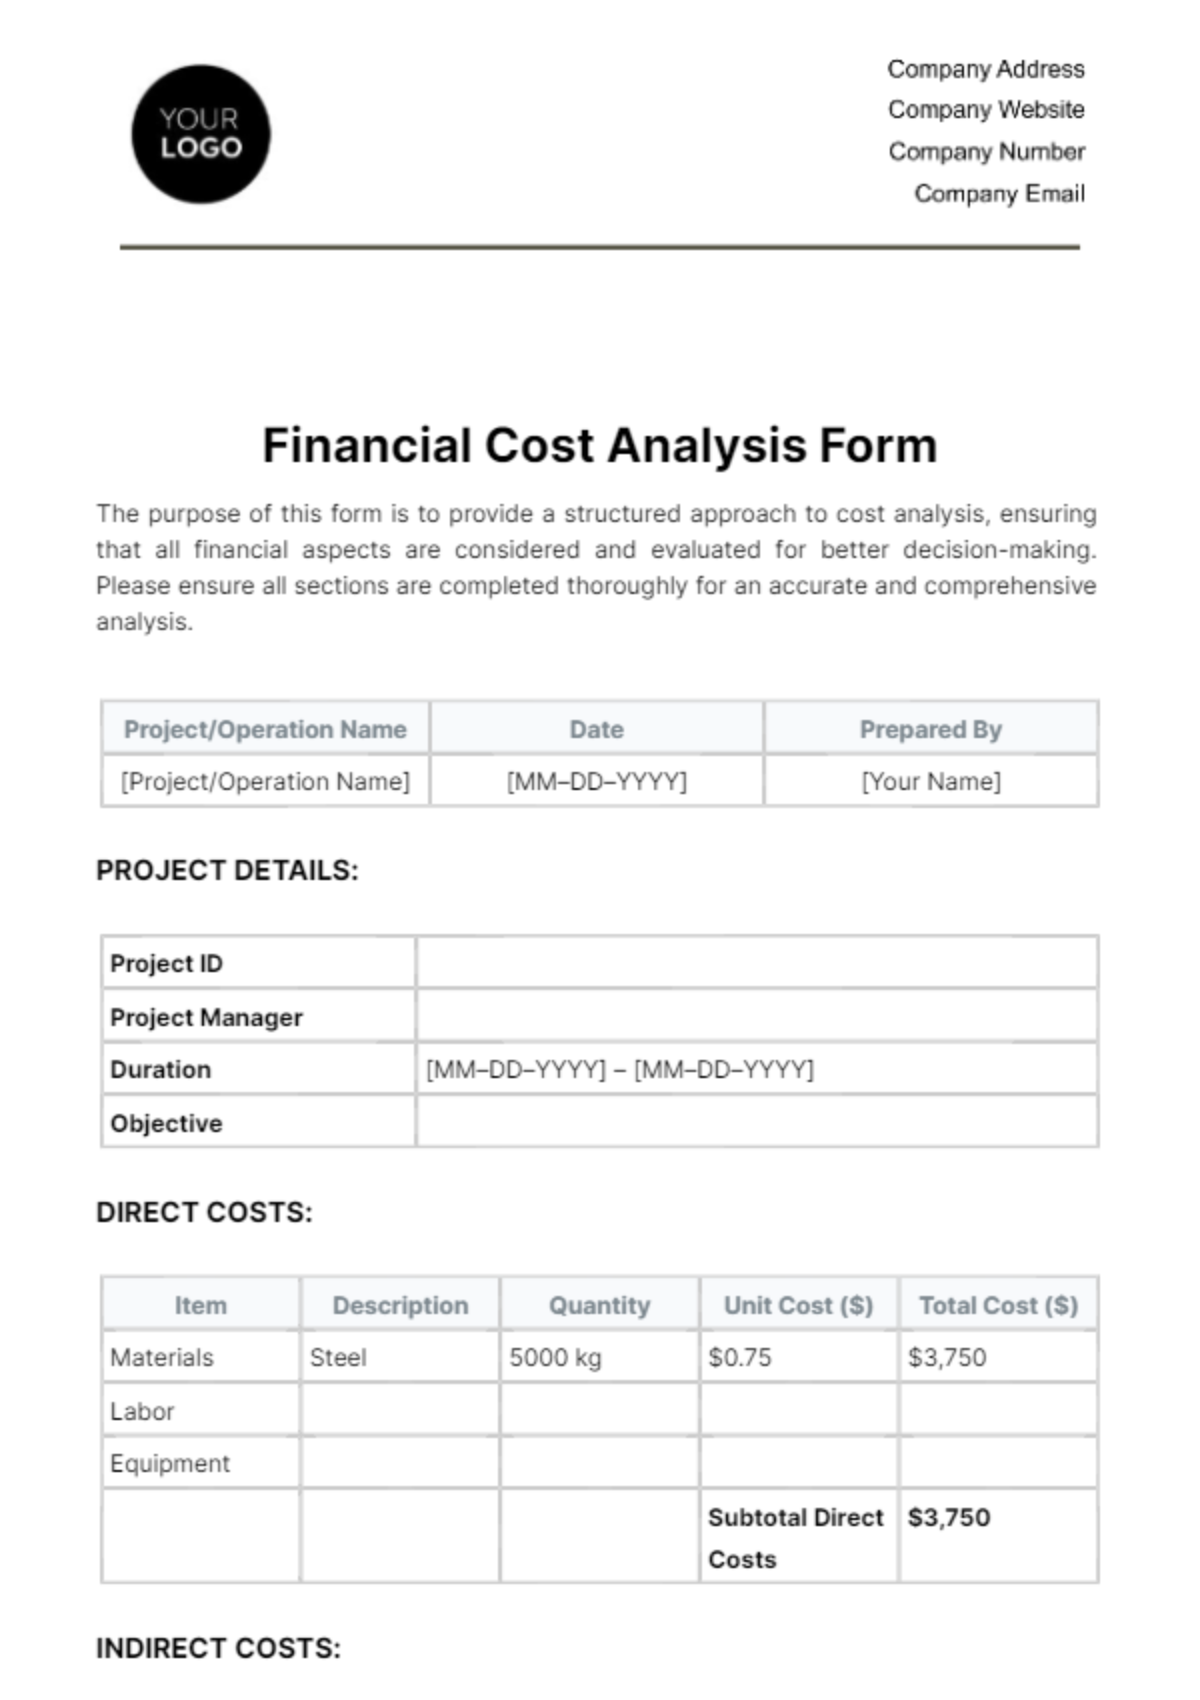 Financial Cost Analysis Form Template